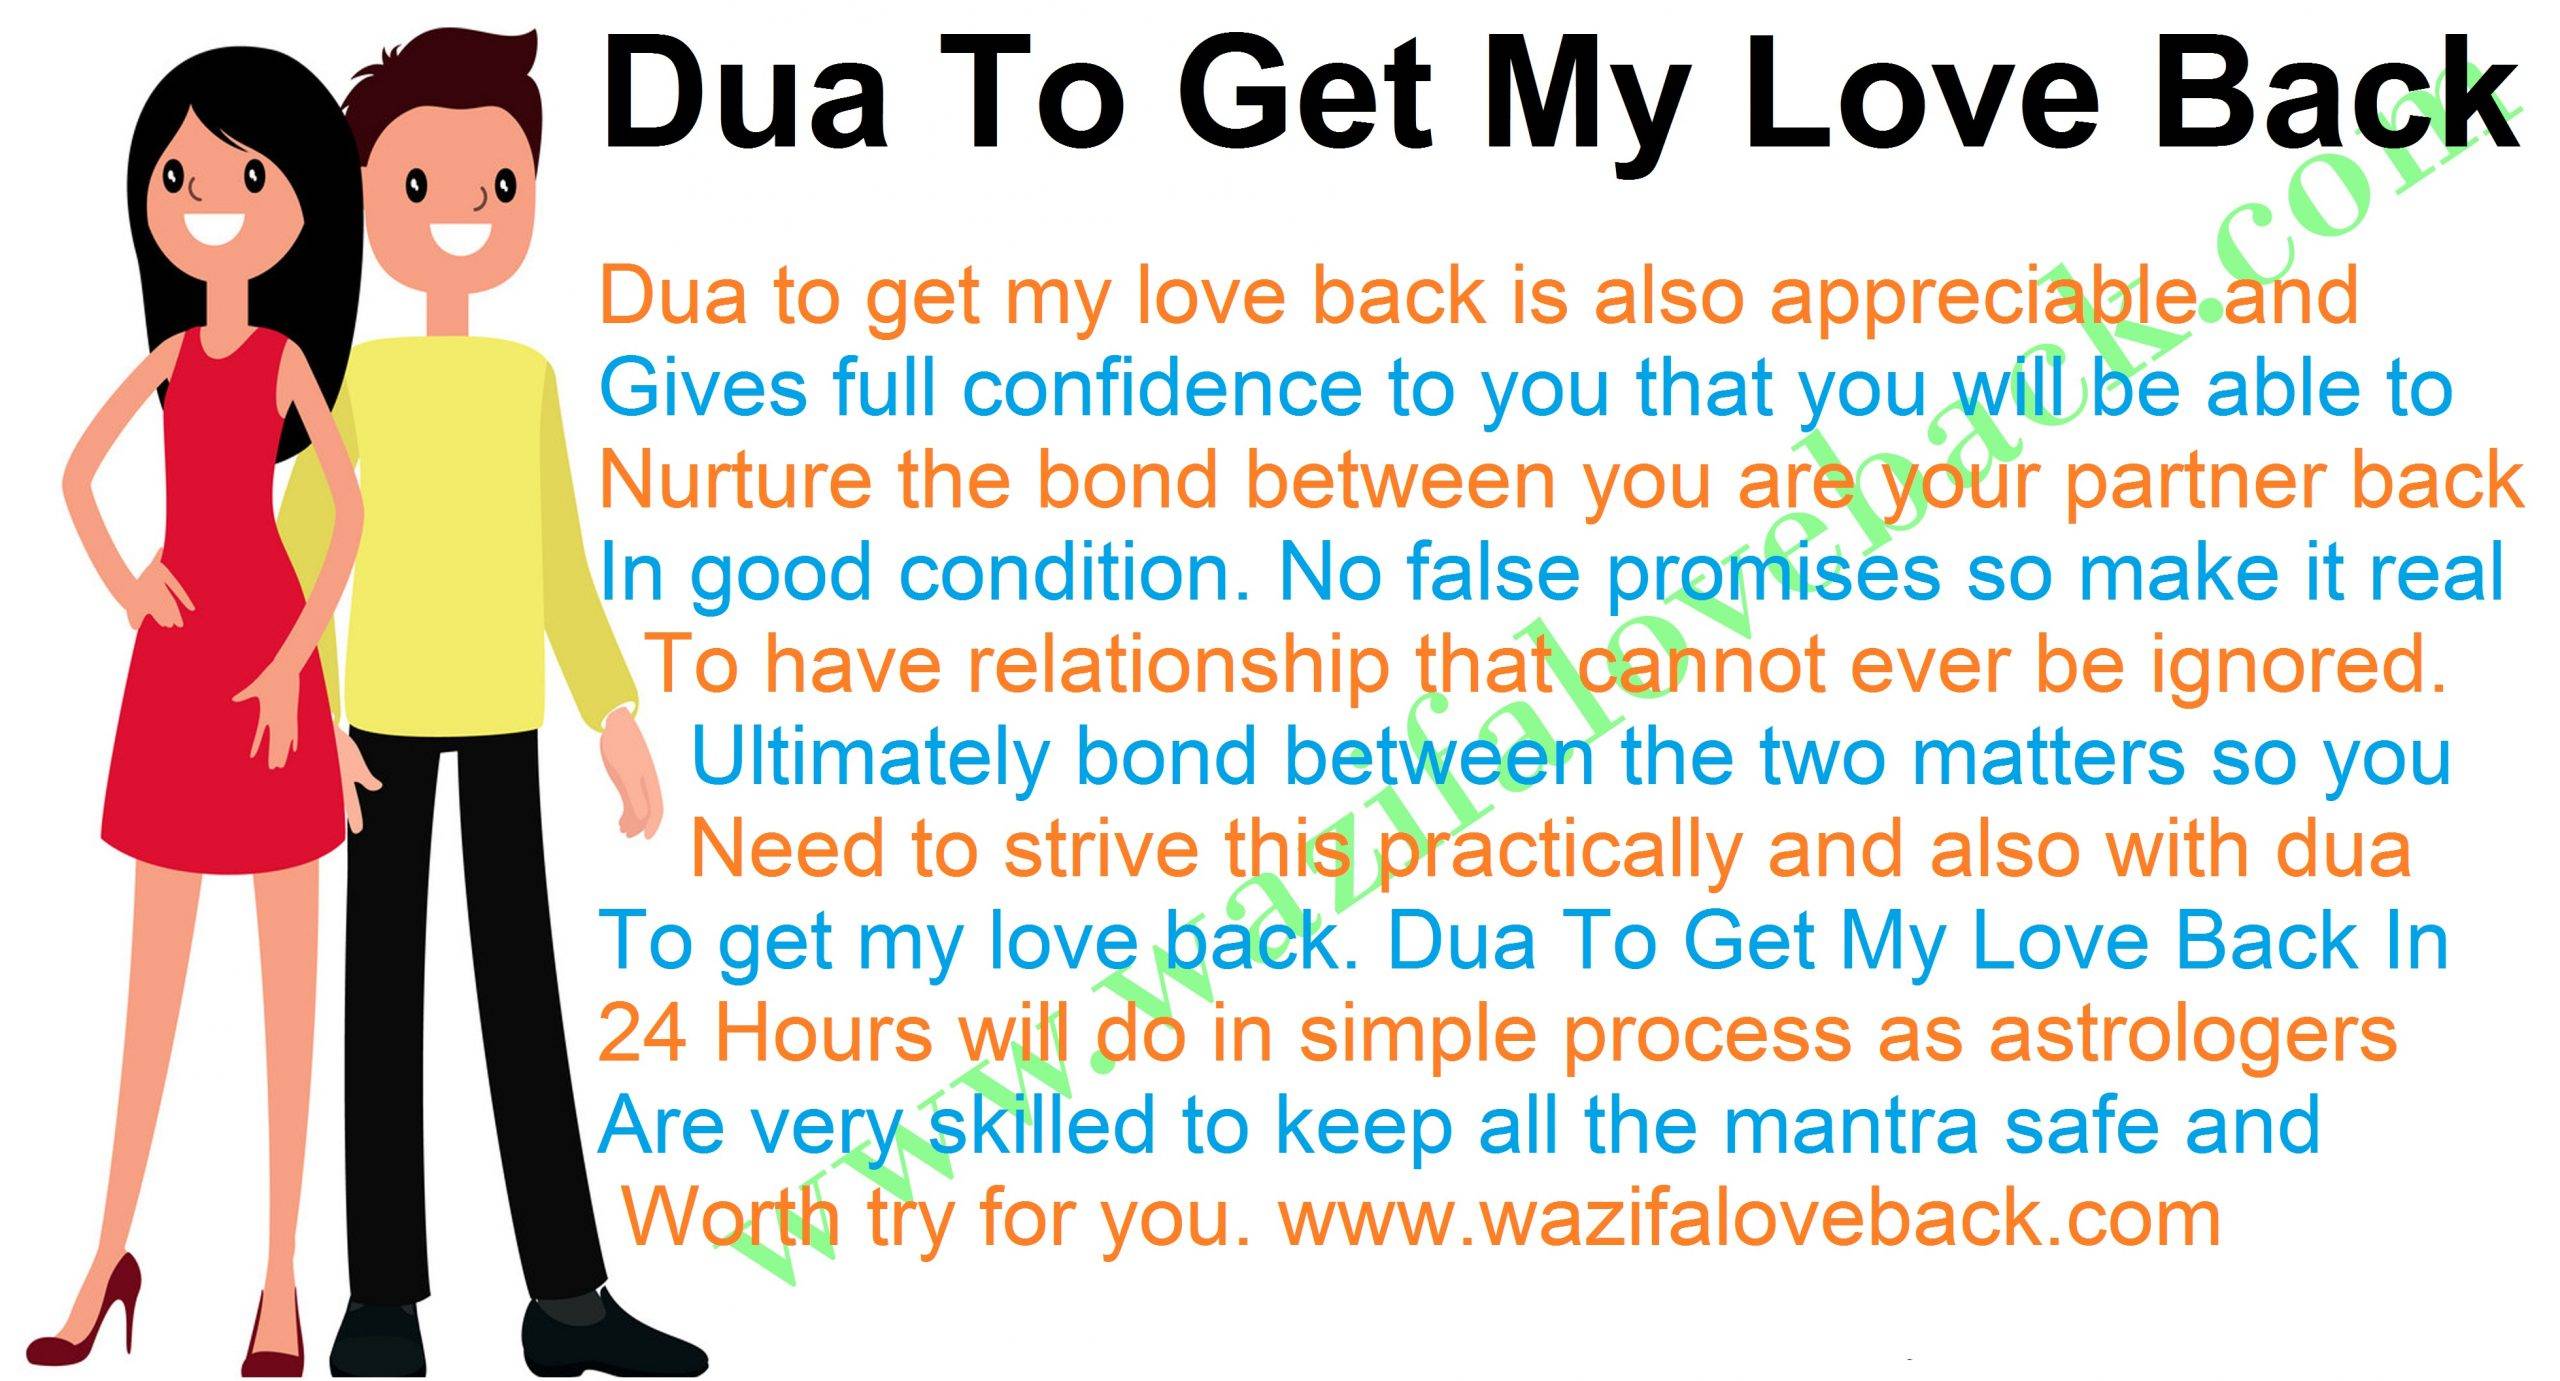 Dua To Get My Love Back